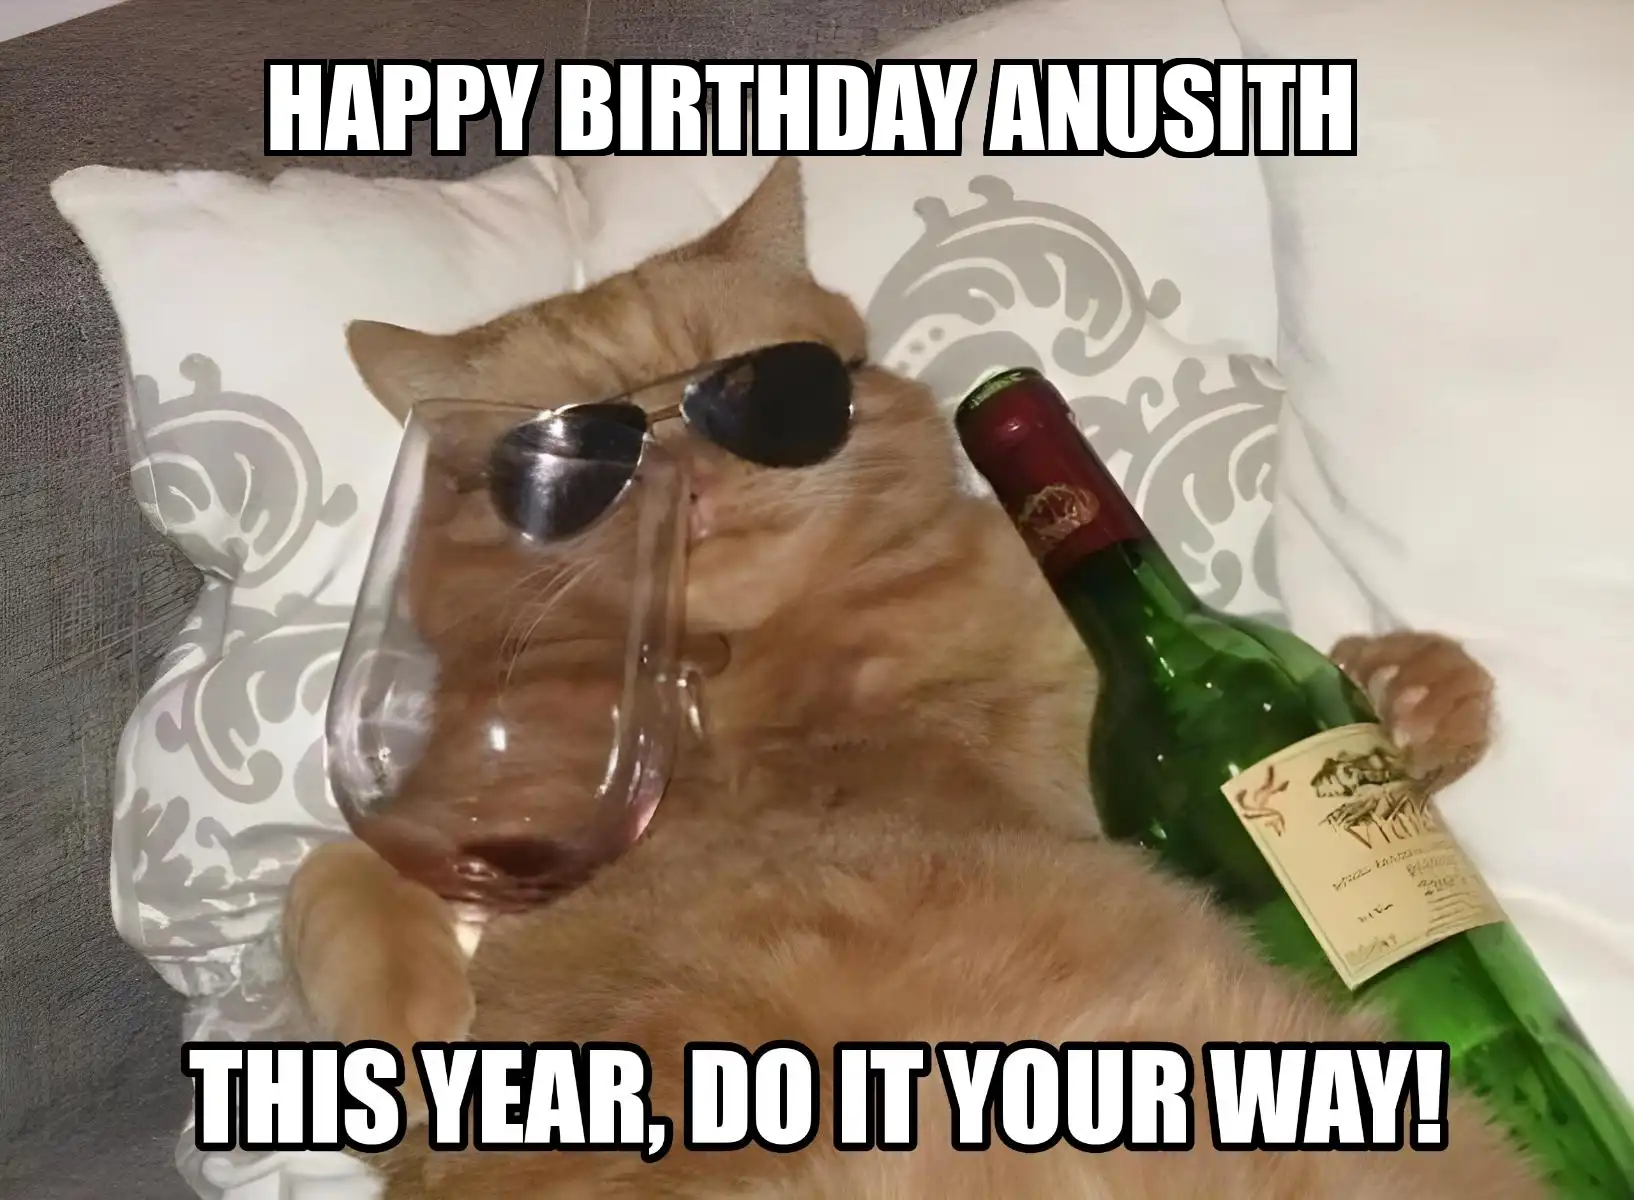 Happy Birthday Anusith This Year Do It Your Way Meme